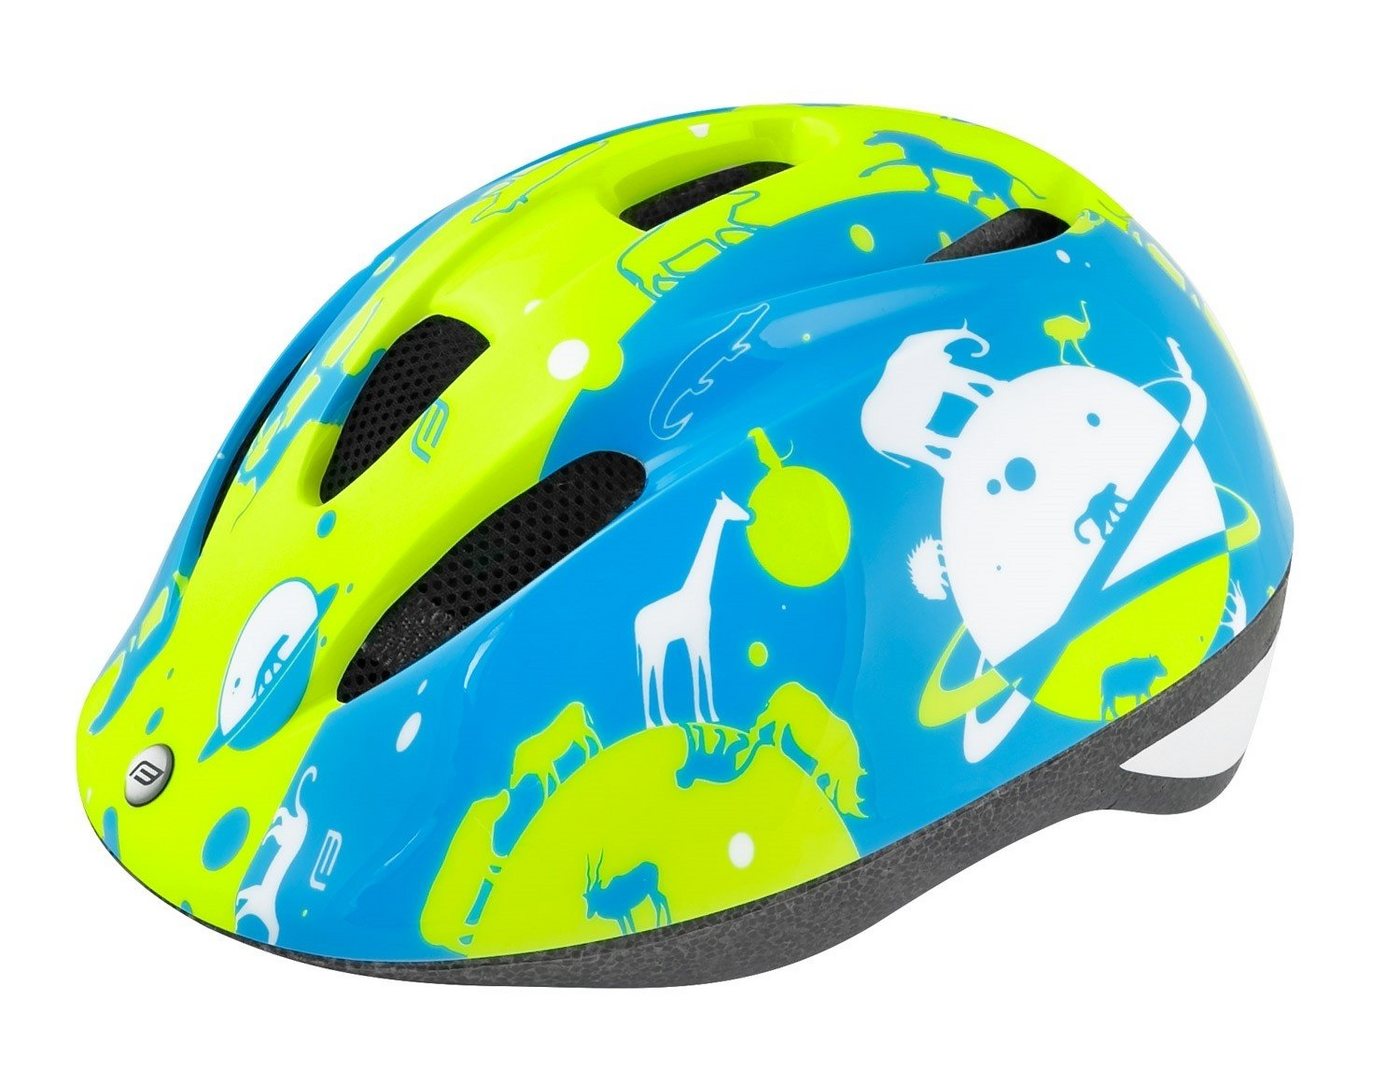 FORCE Fahrradhelm Helm FORCE FUN PLANETS child fluo-blue S von FORCE